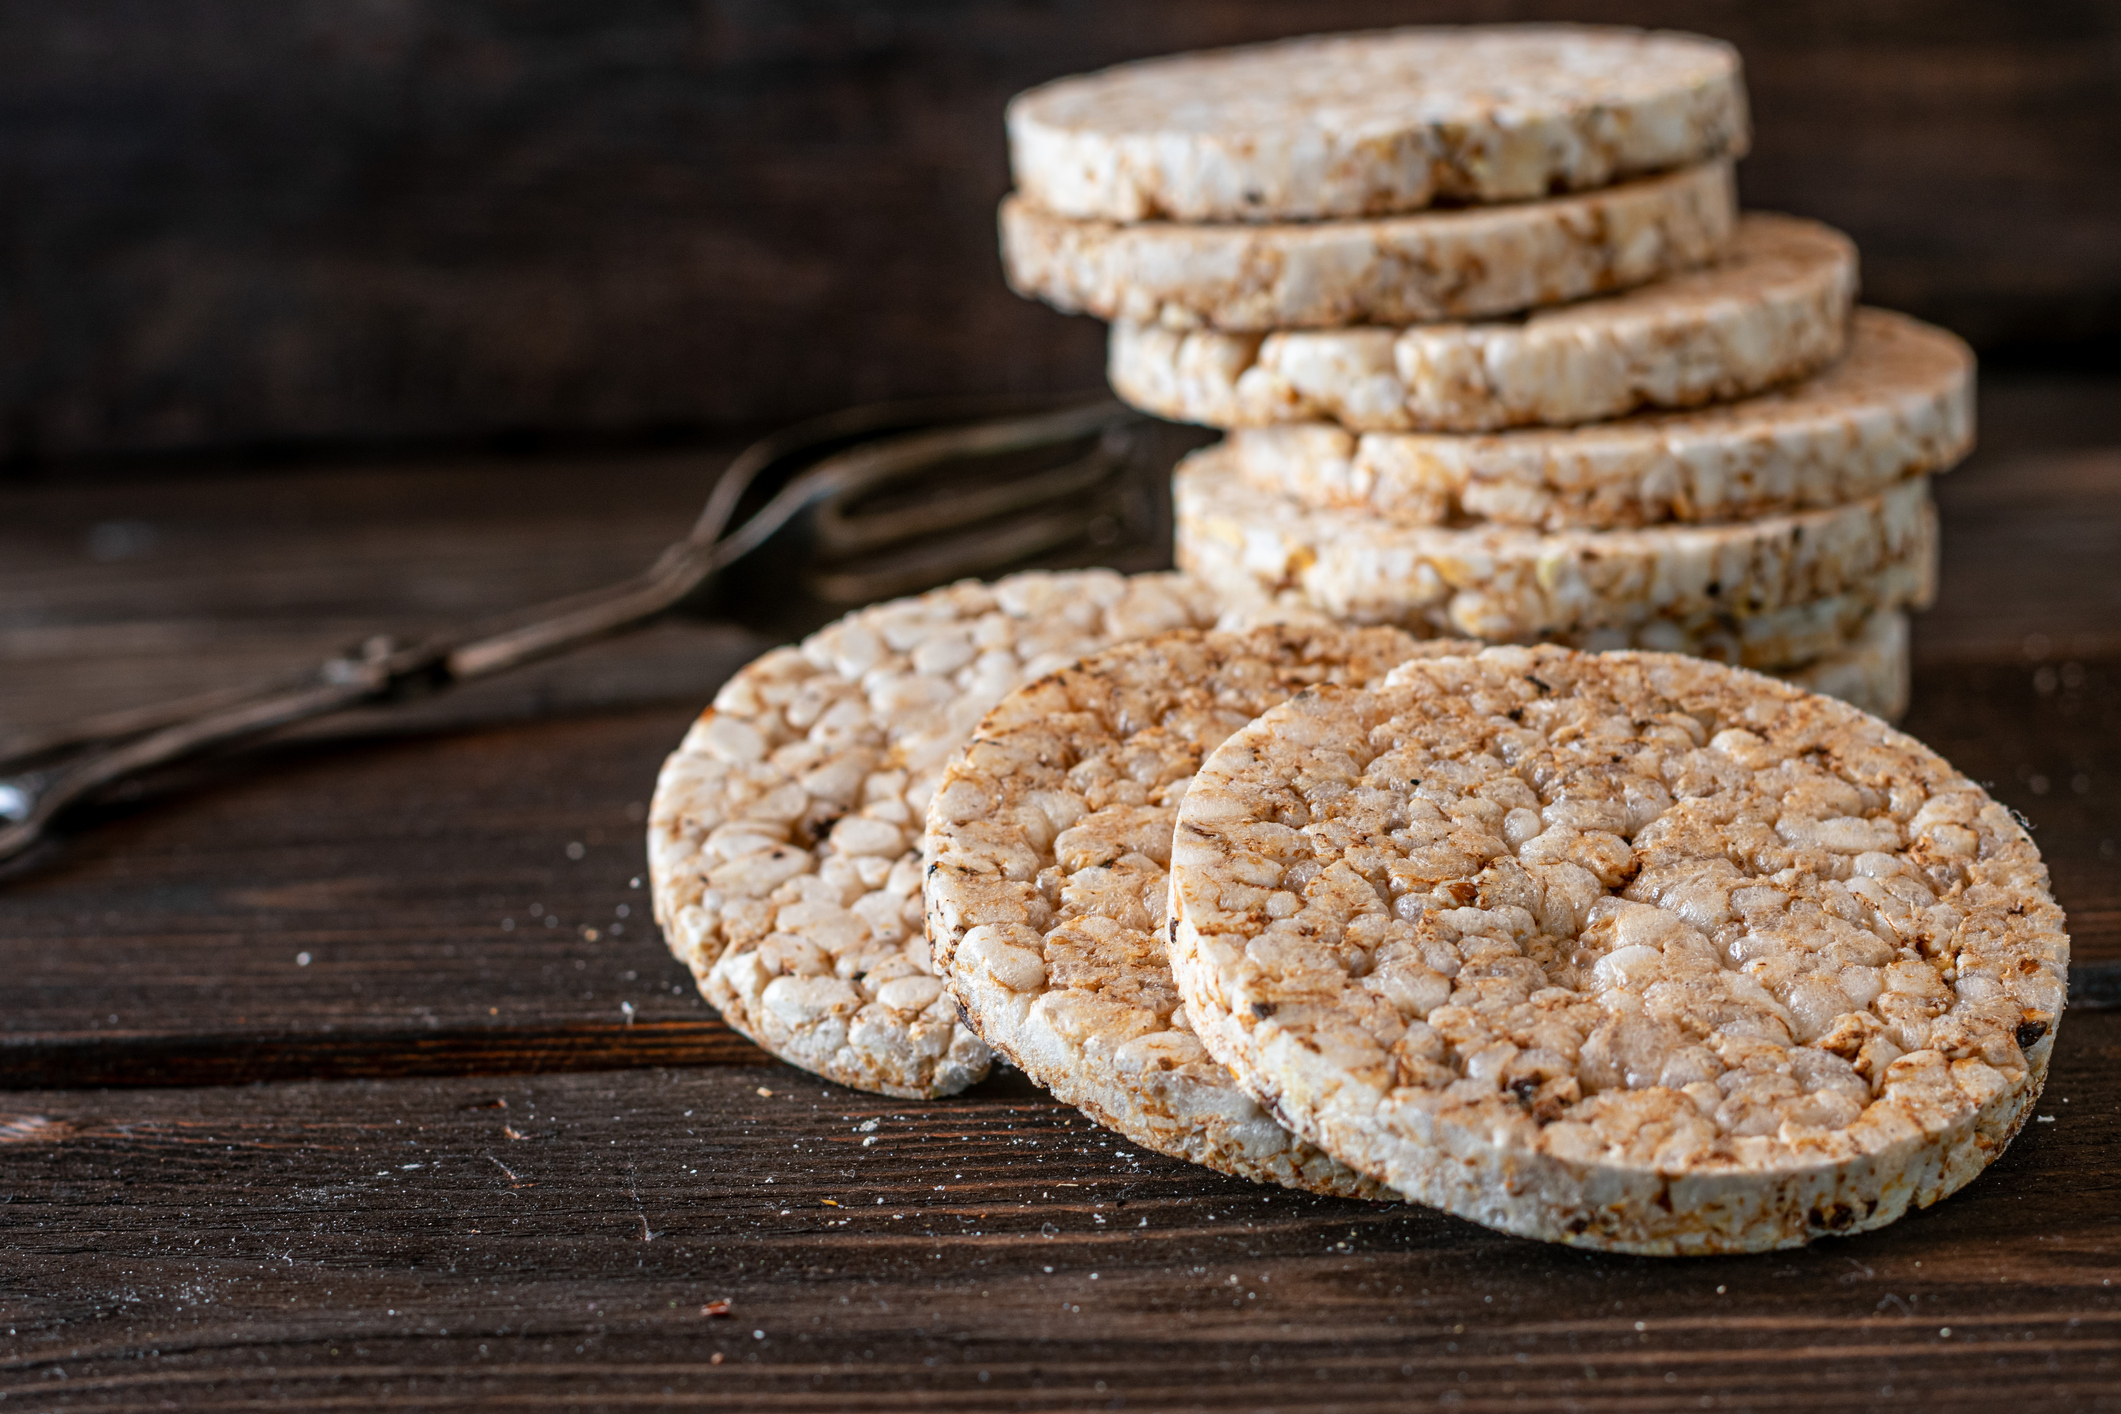 Are rice cakes considered plant-based?